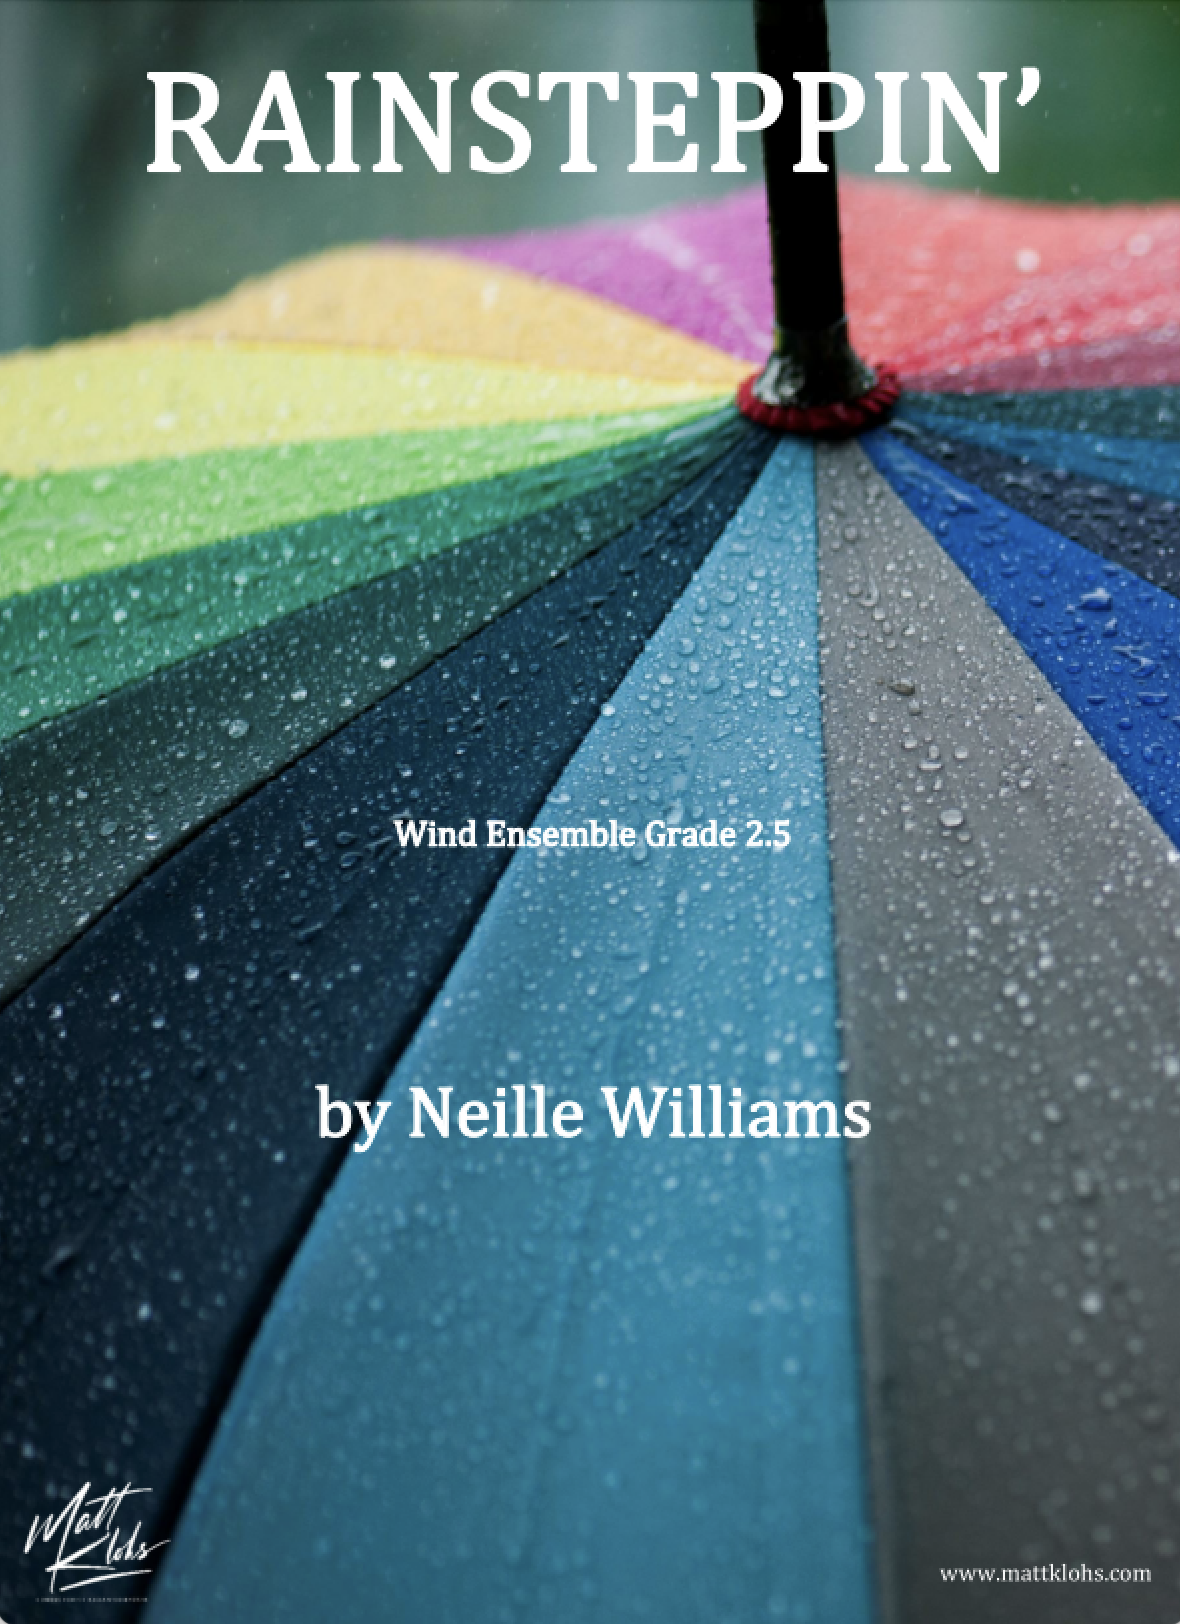 Rainsteppin' by Nellie Williams